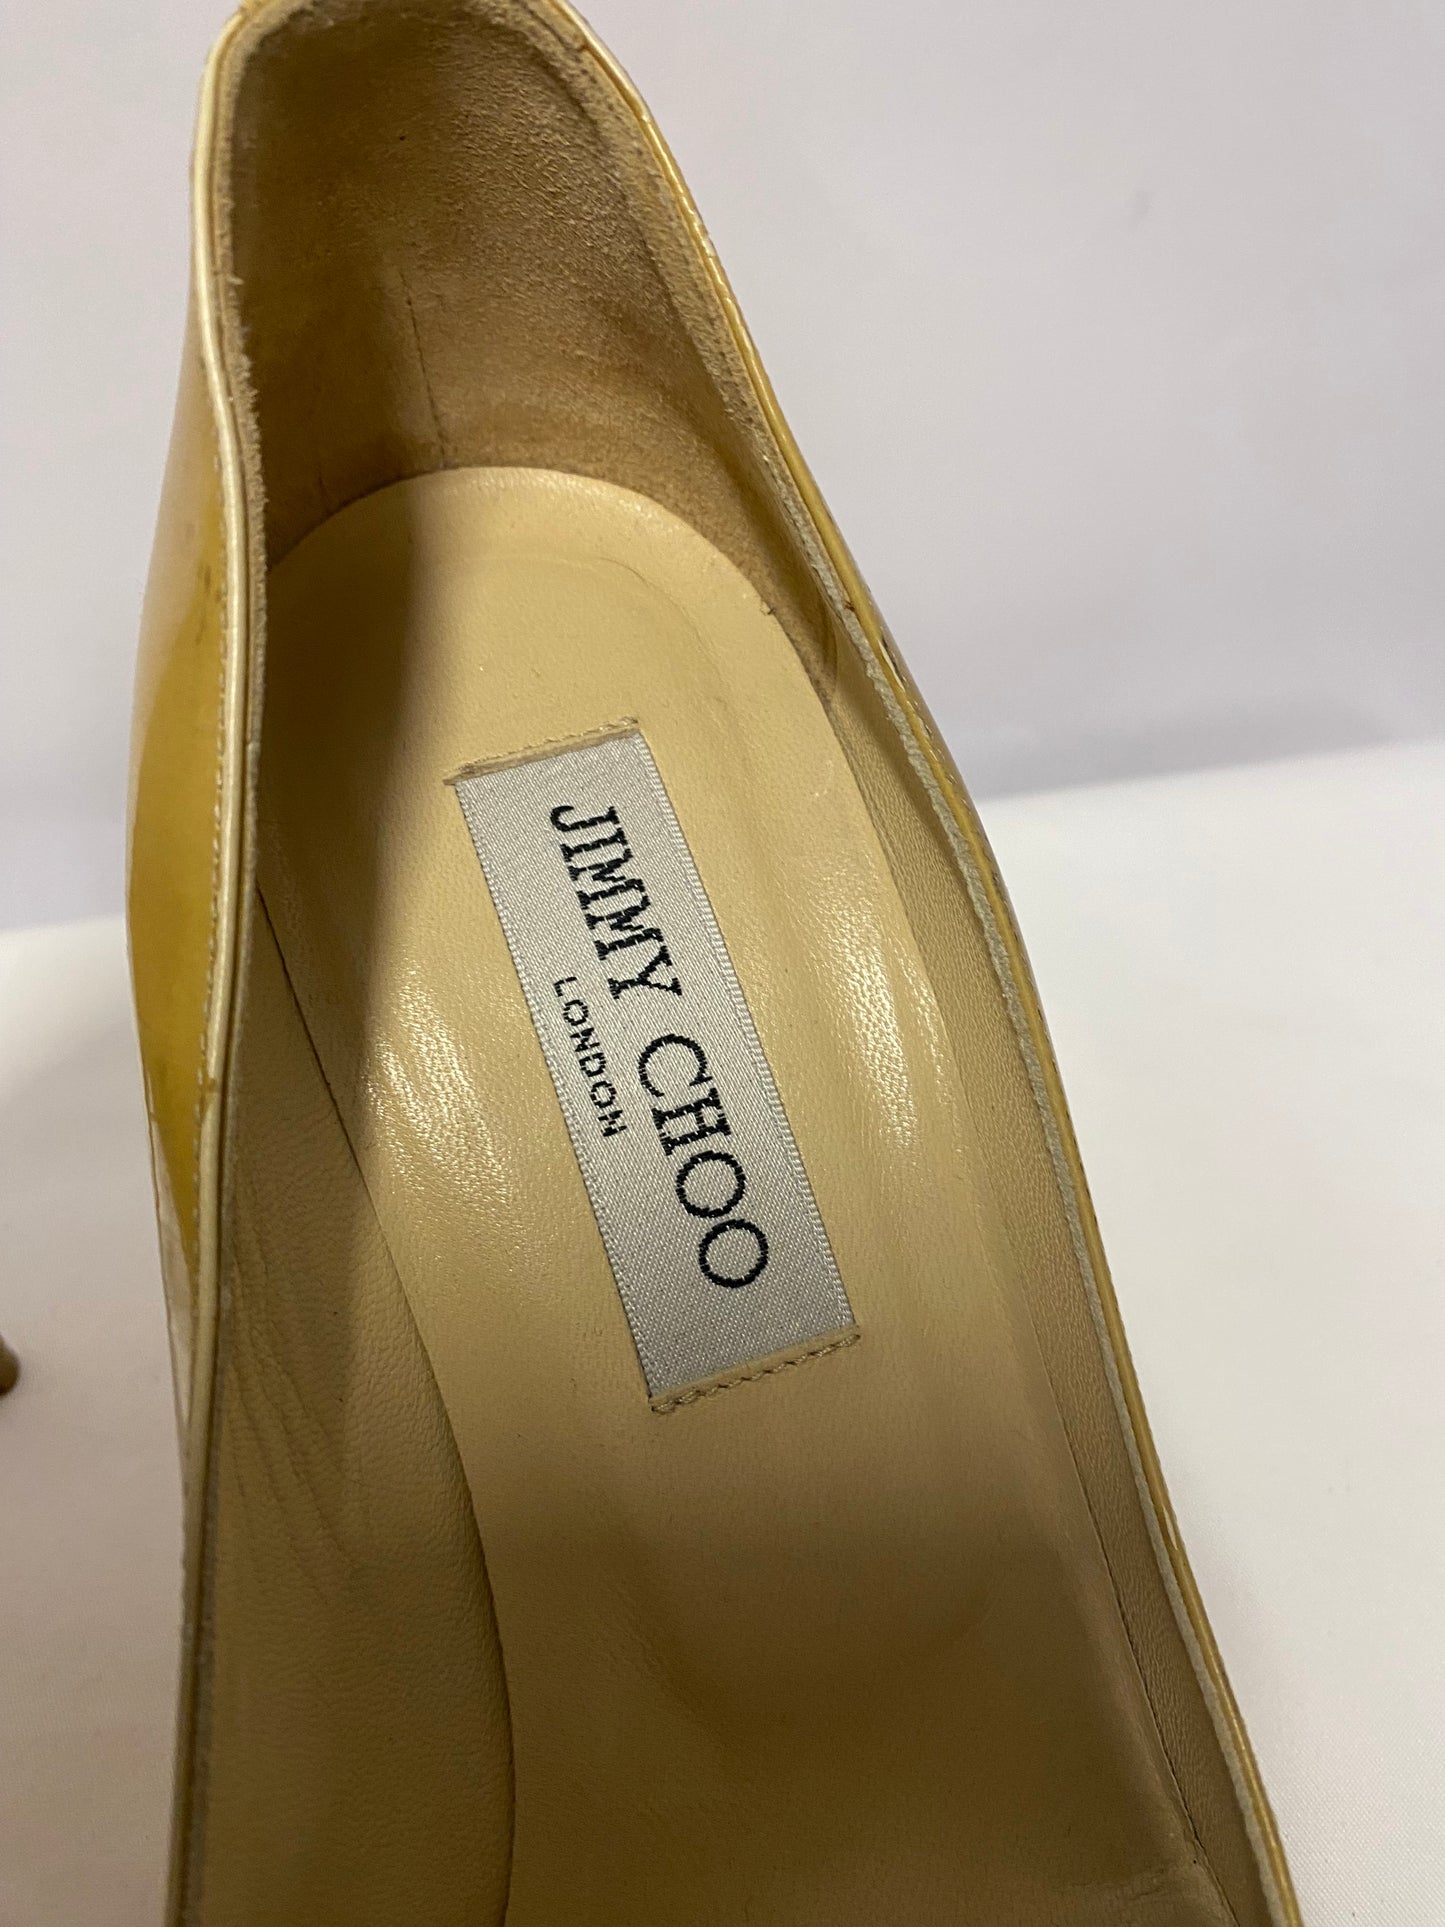 Jimmy Choo Yellow Patent Pointed Pumps 5